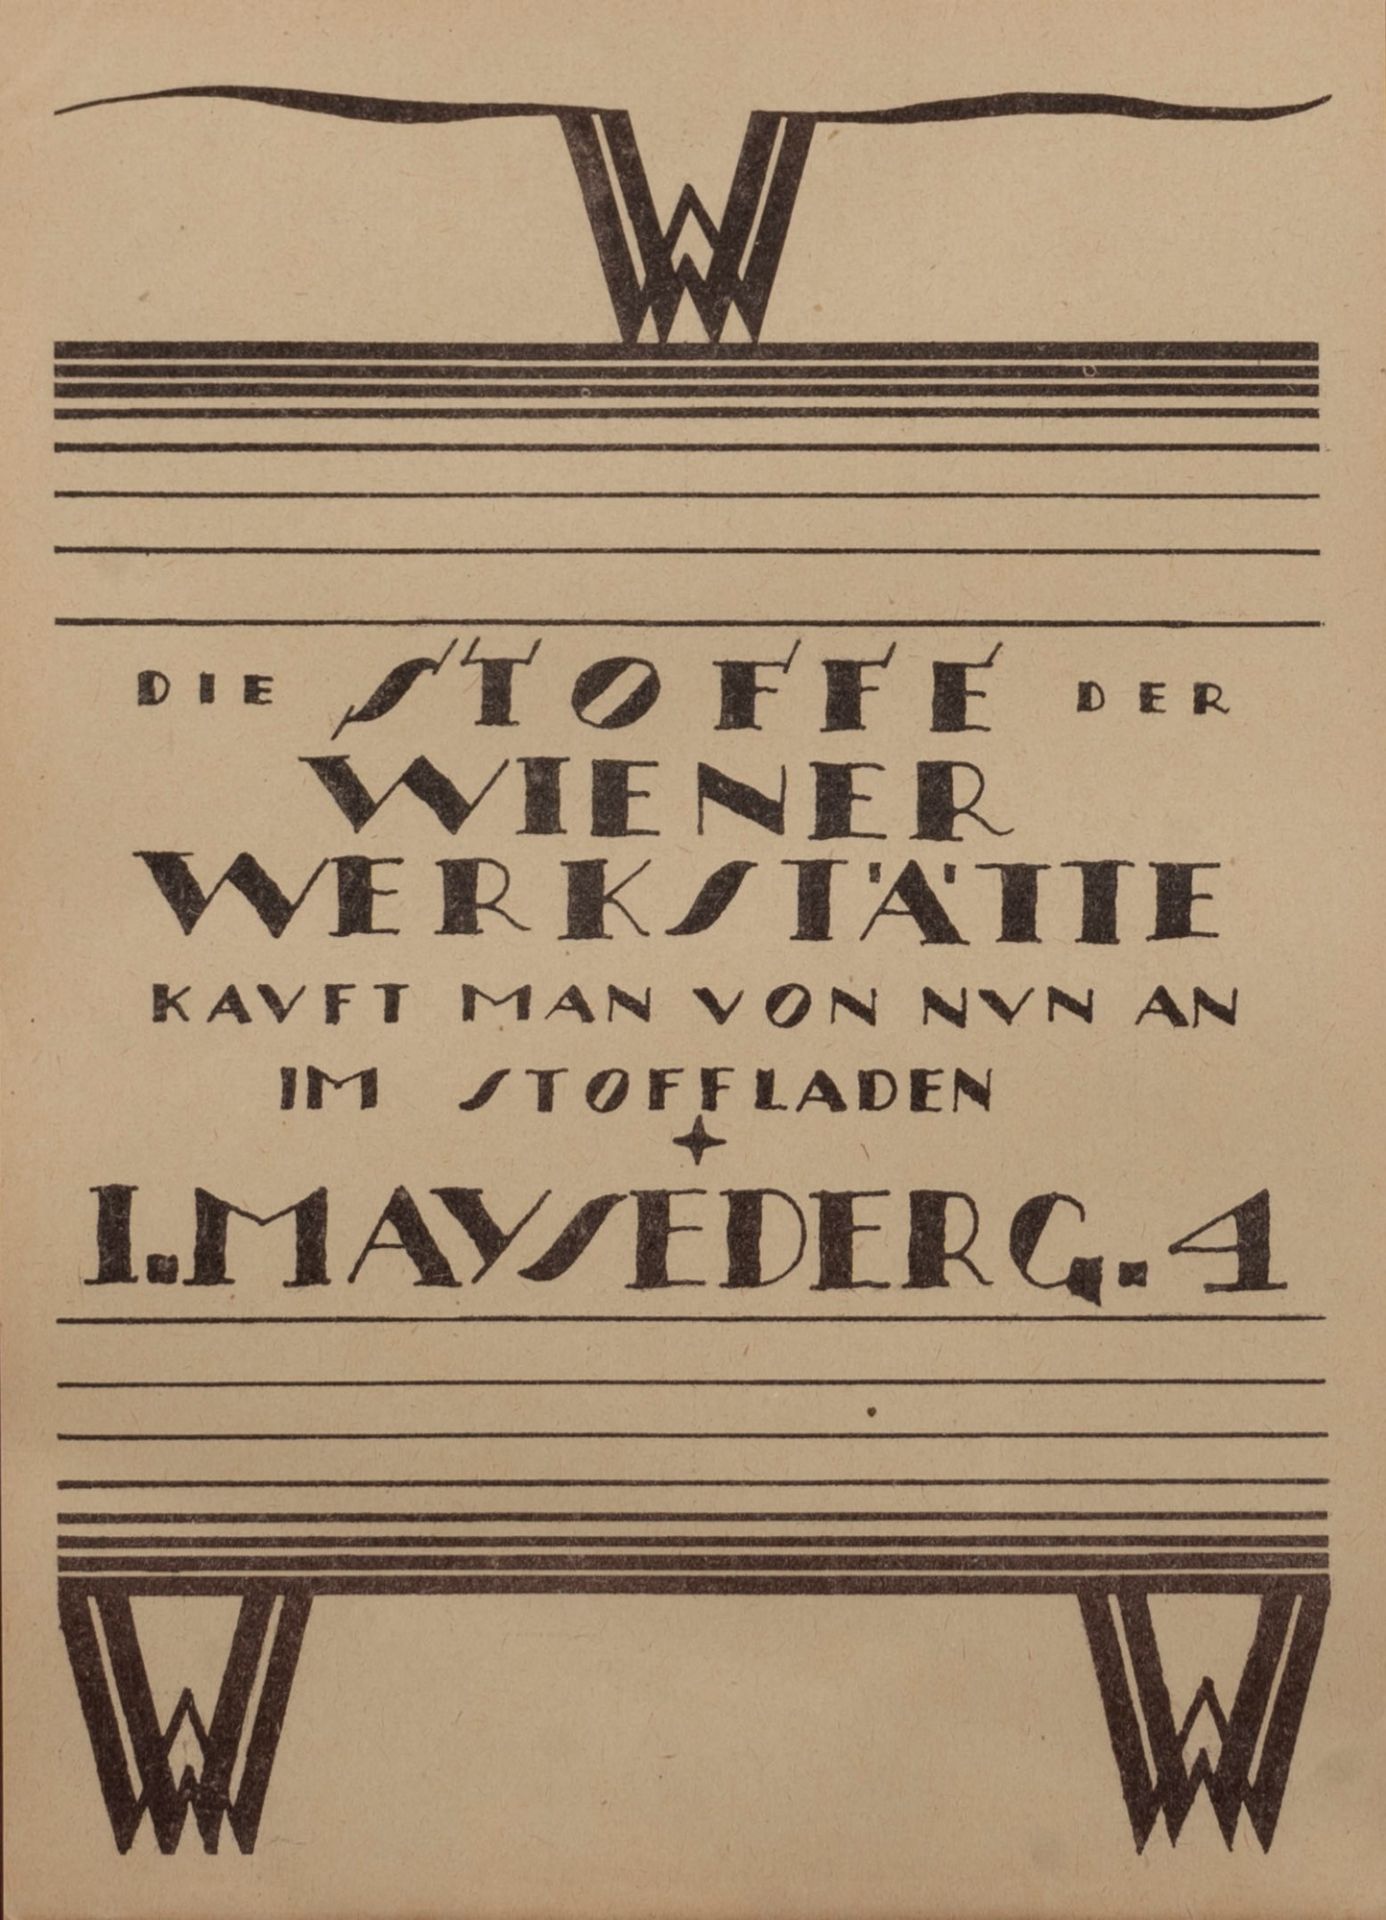 Advertising poster for the Wienerwerkstätte cloth shop, early 20th century - Image 2 of 3